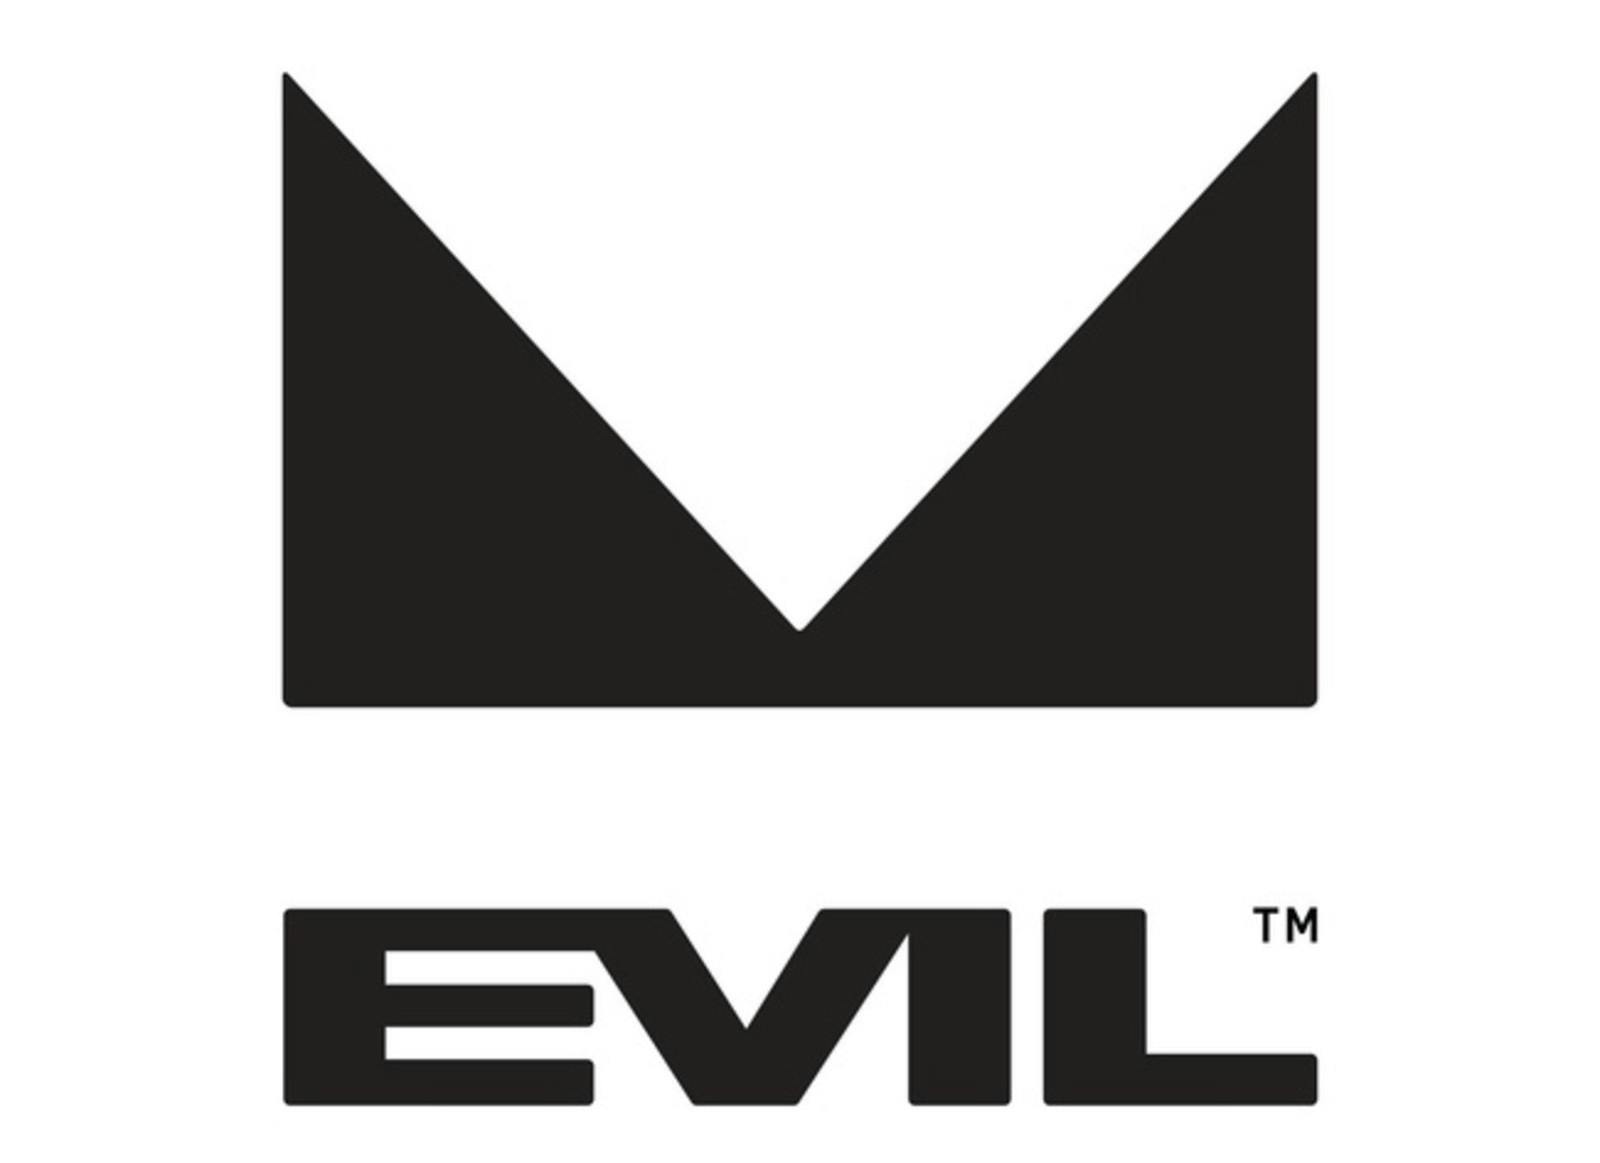 The Evil Bikes logo that says "Evil" below two joined black triangles.